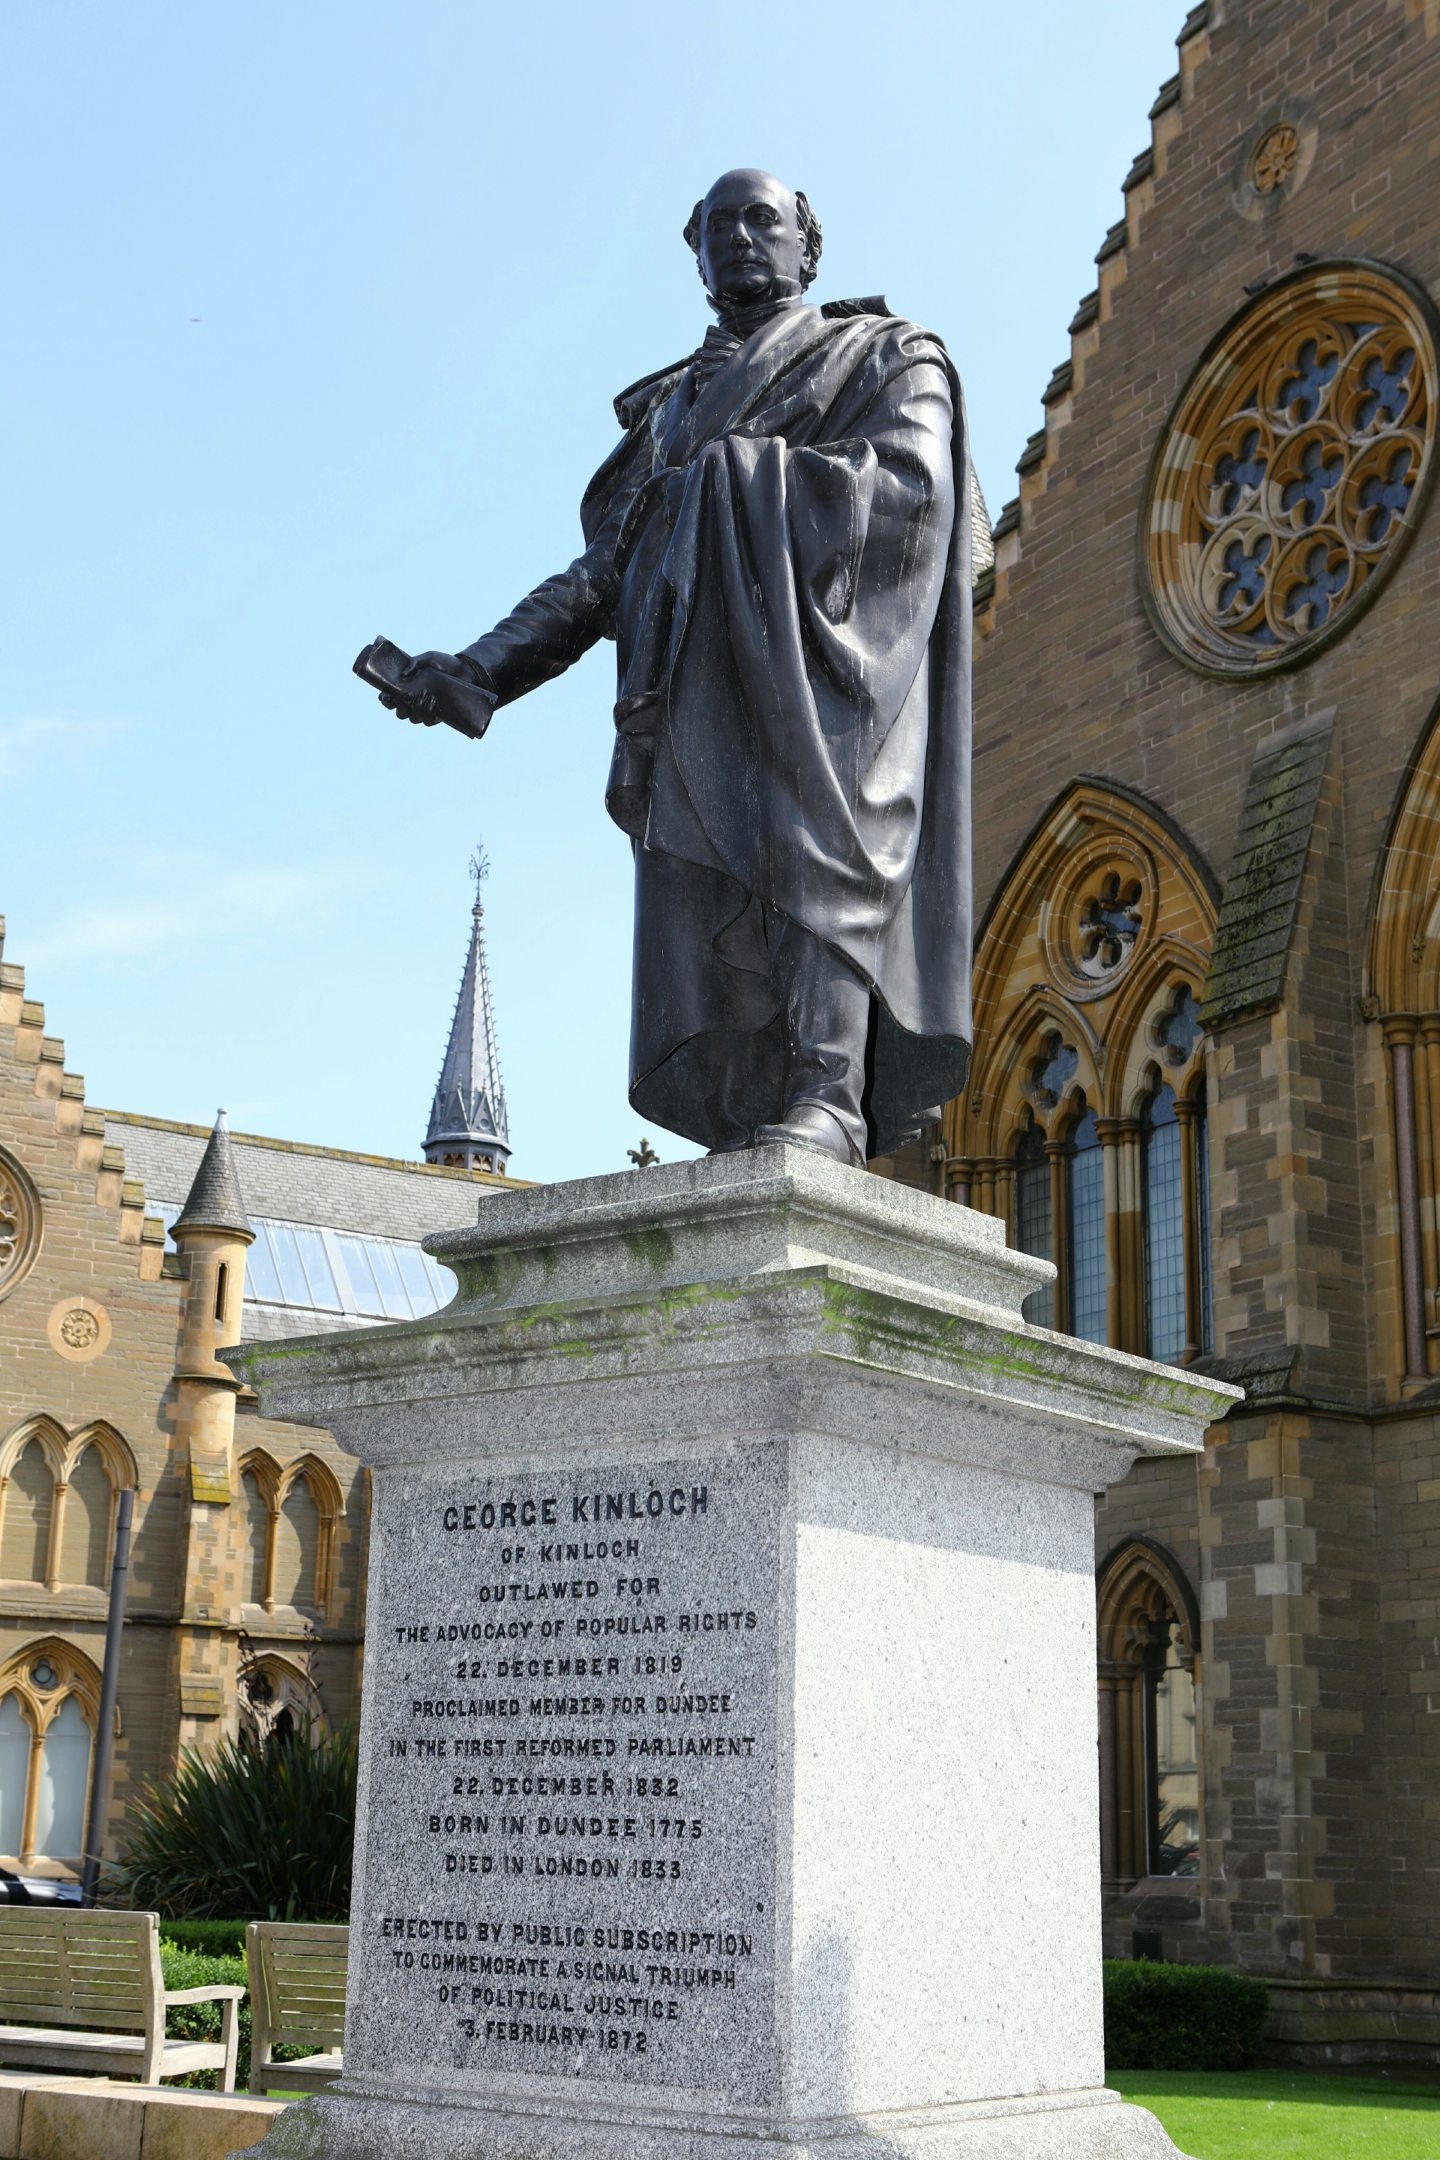 The George Kinloch statue.